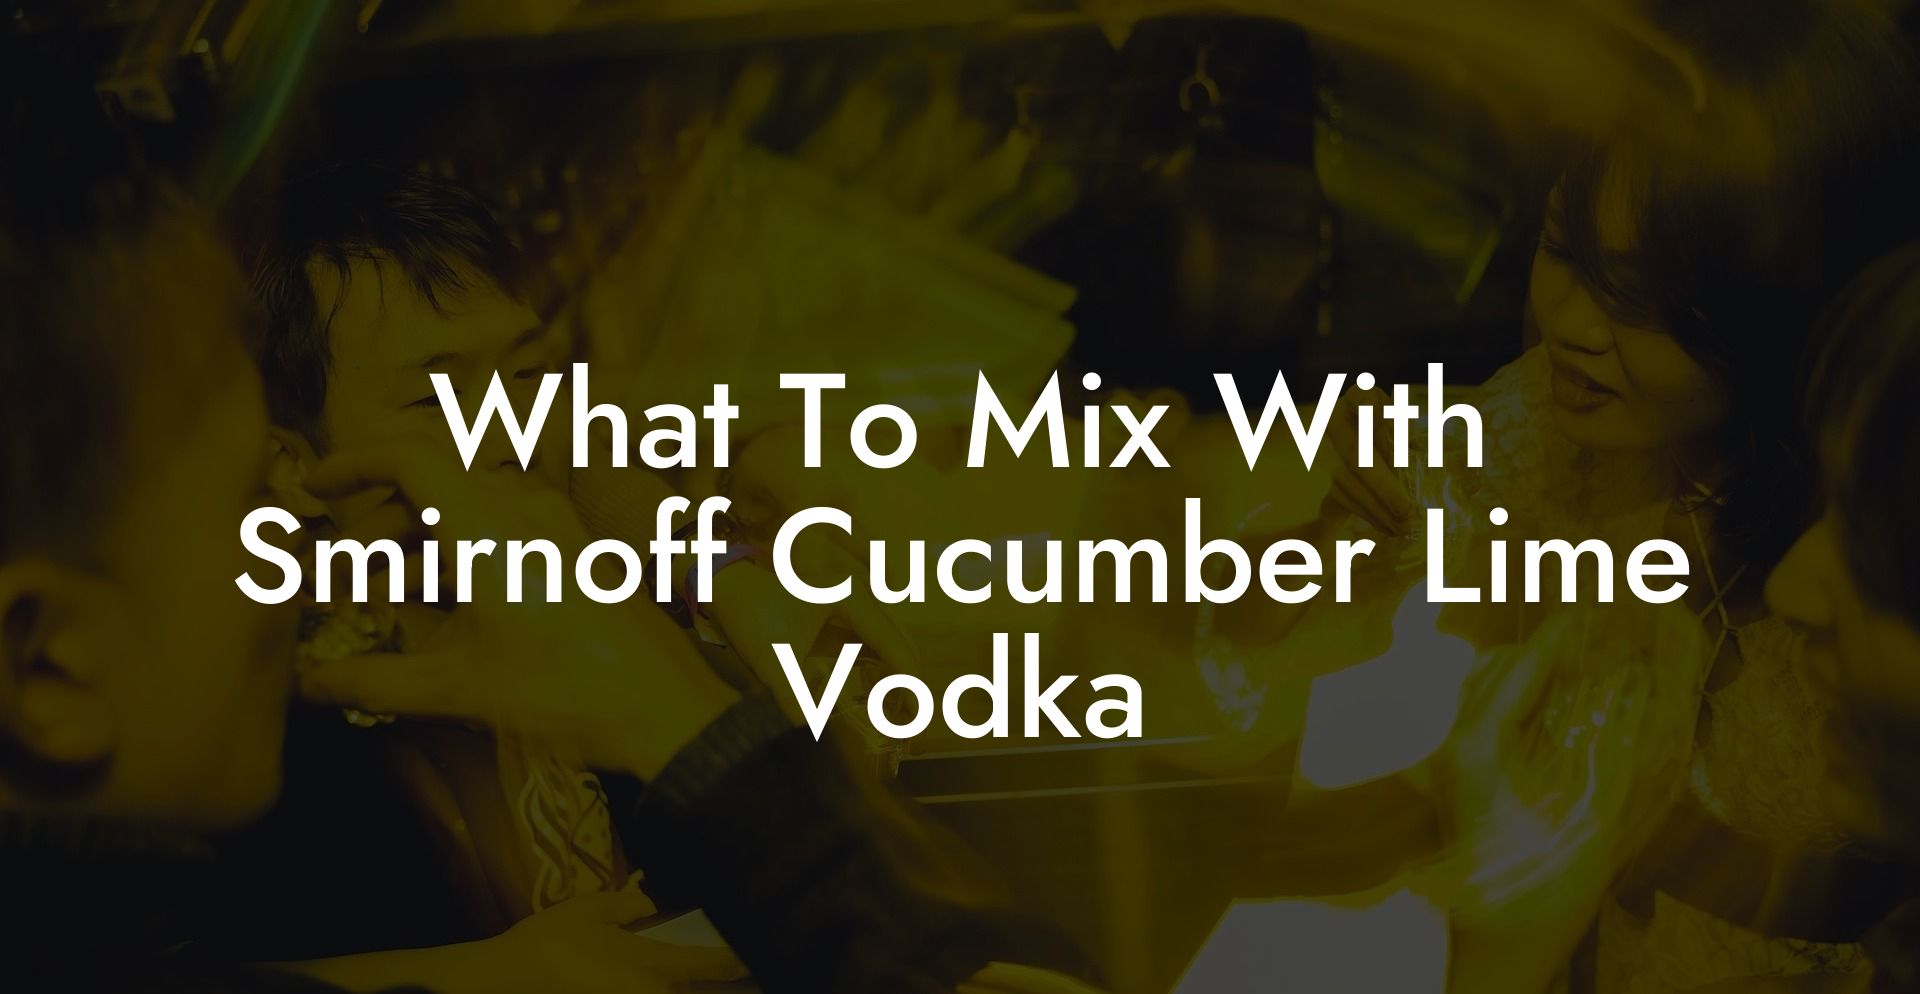 What To Mix With Smirnoff Cucumber Lime Vodka